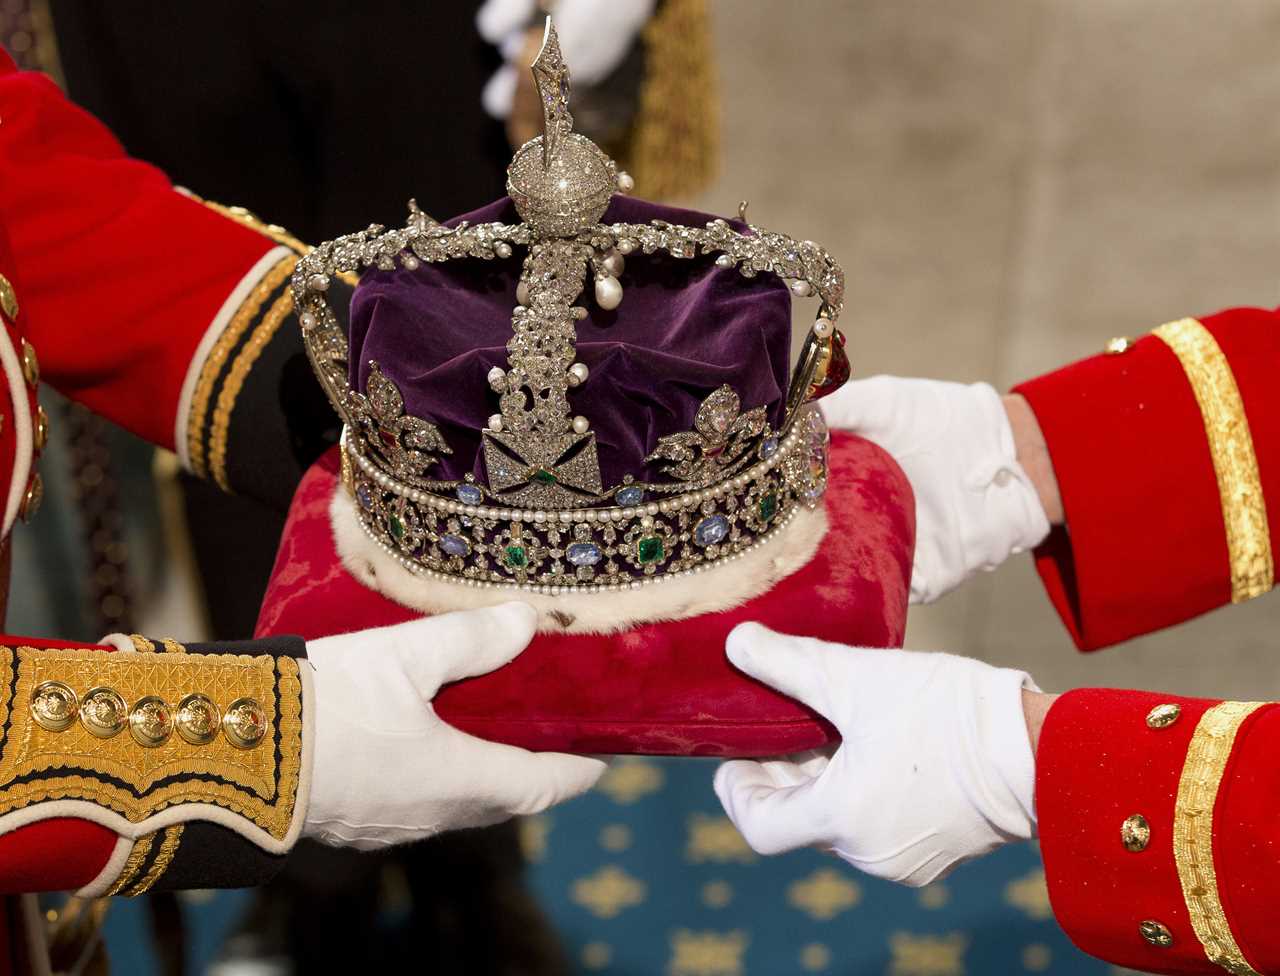 Will King Charles wear the same crowns as the Queen?